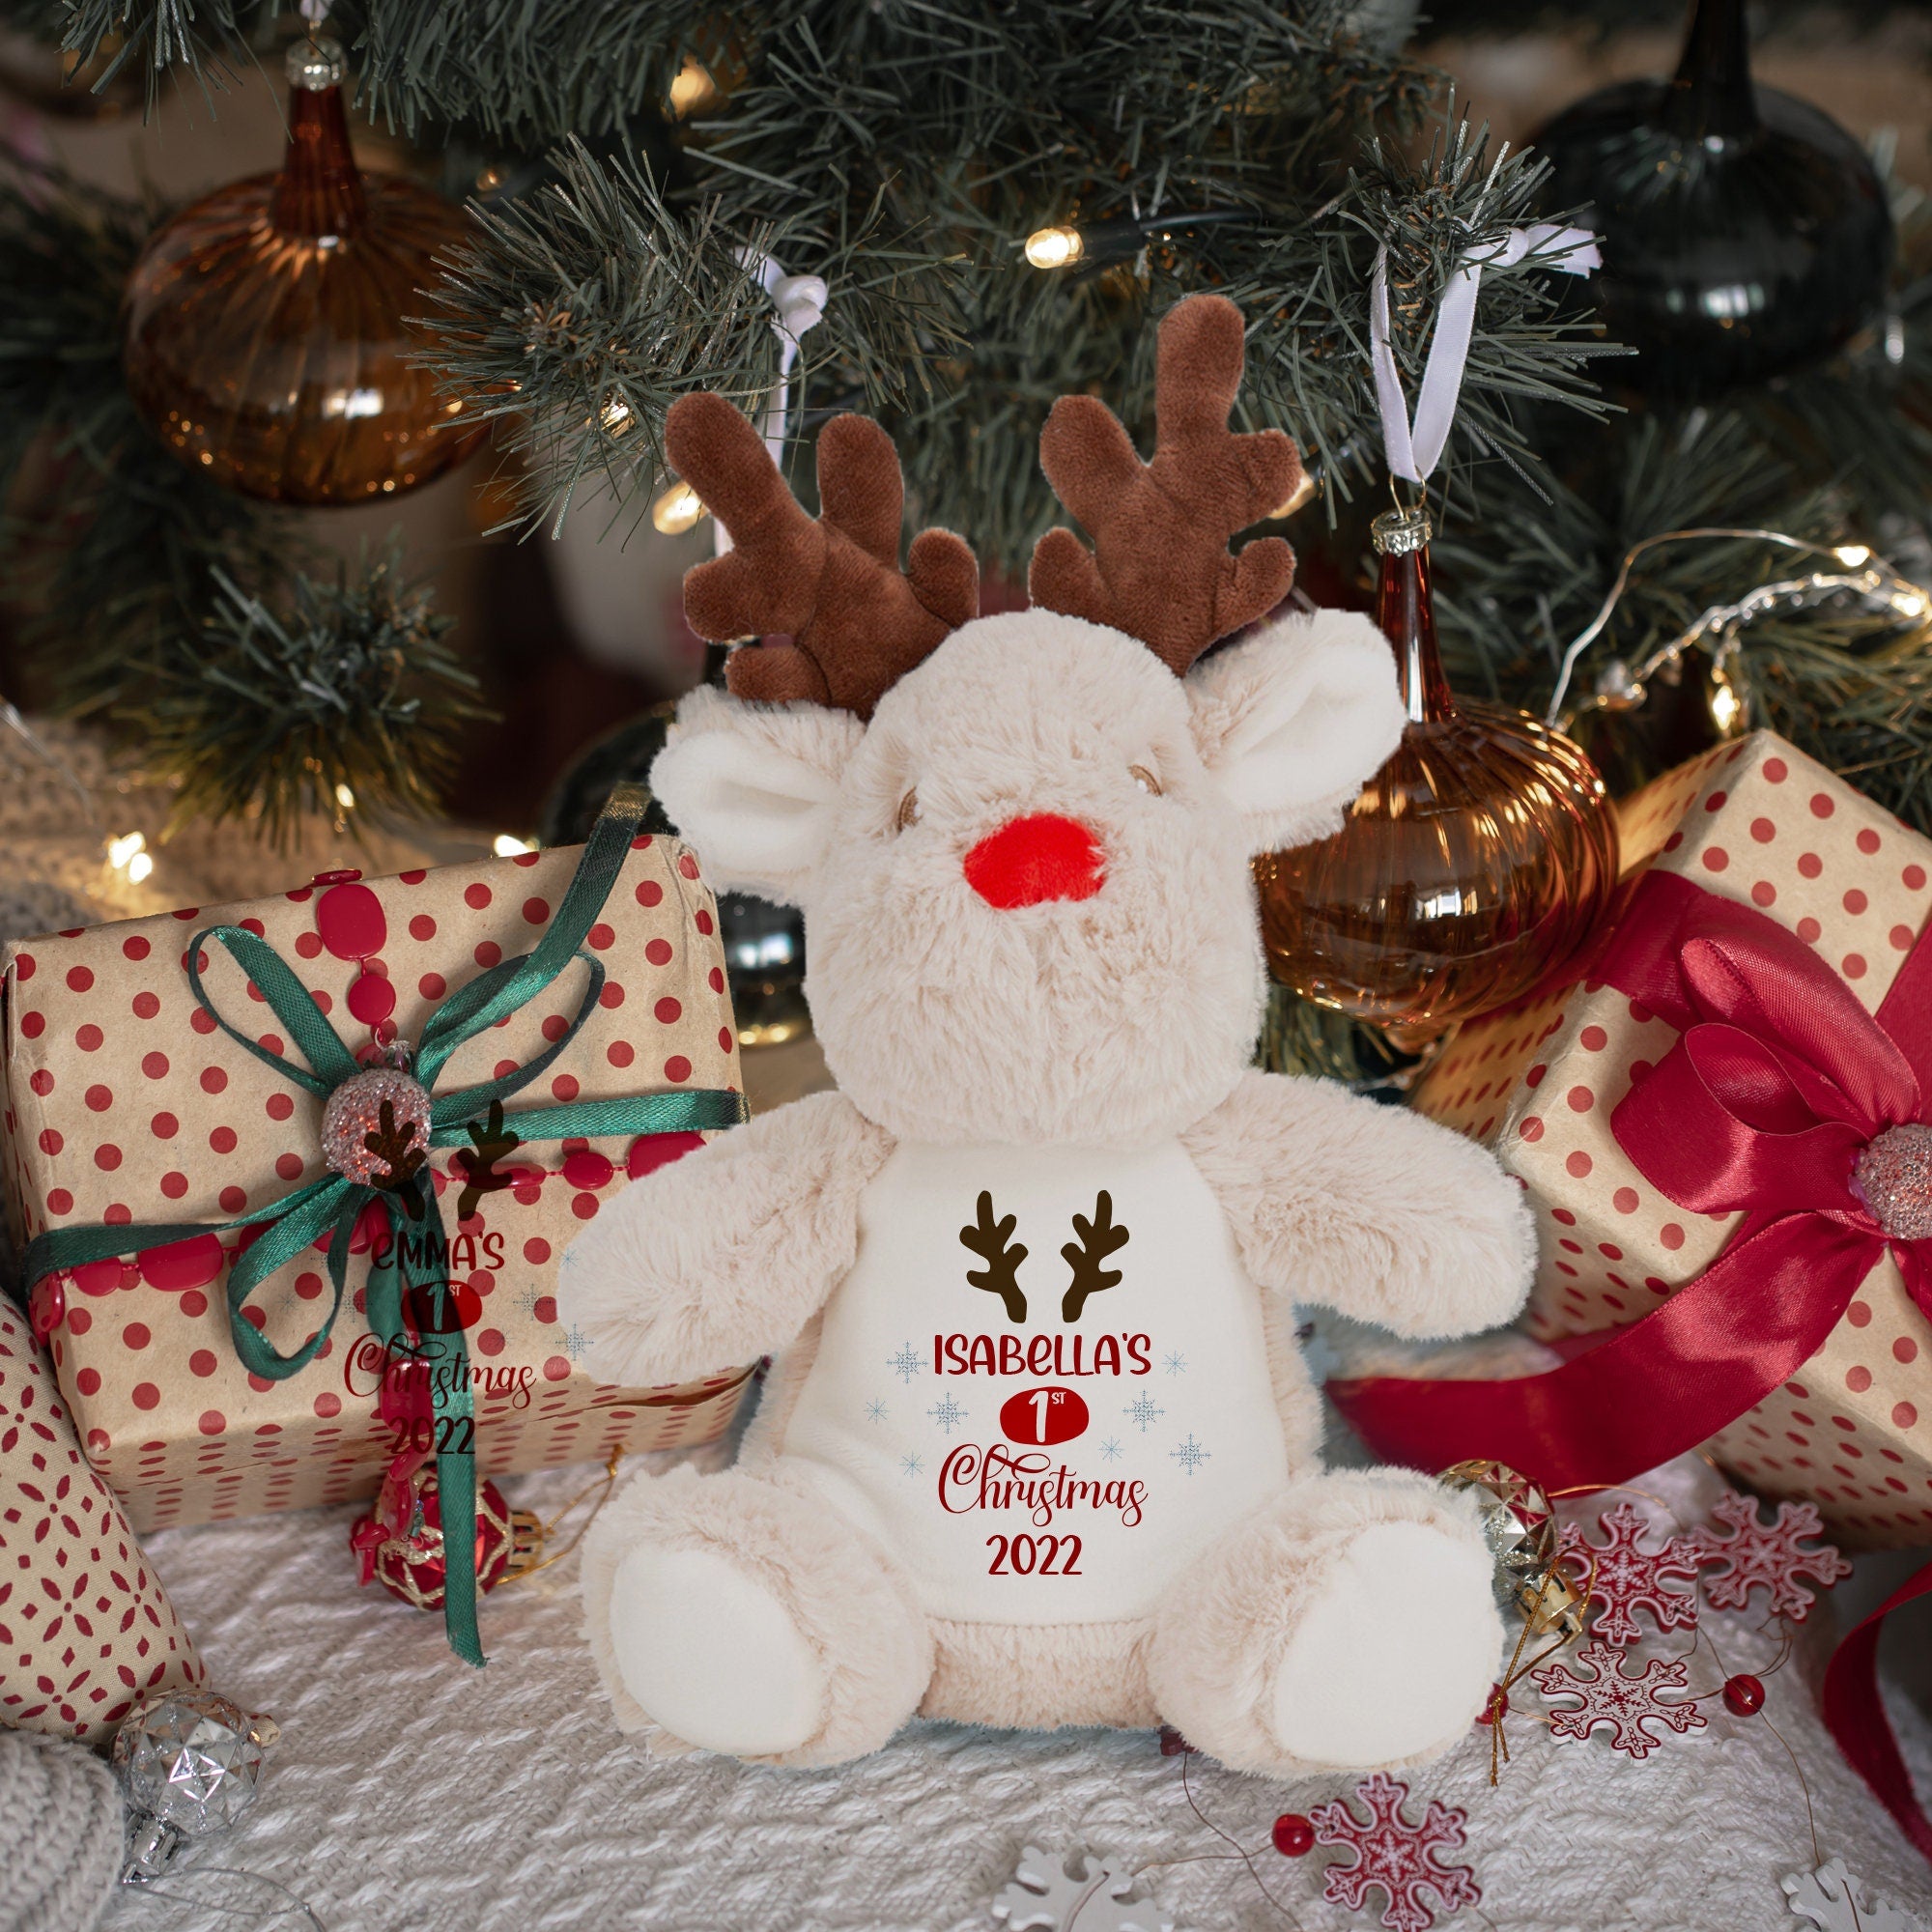 Personalised My First Christmas 2022 Reindeer Soft Toy, Baby Girl Boy 1St Xmas Teddy